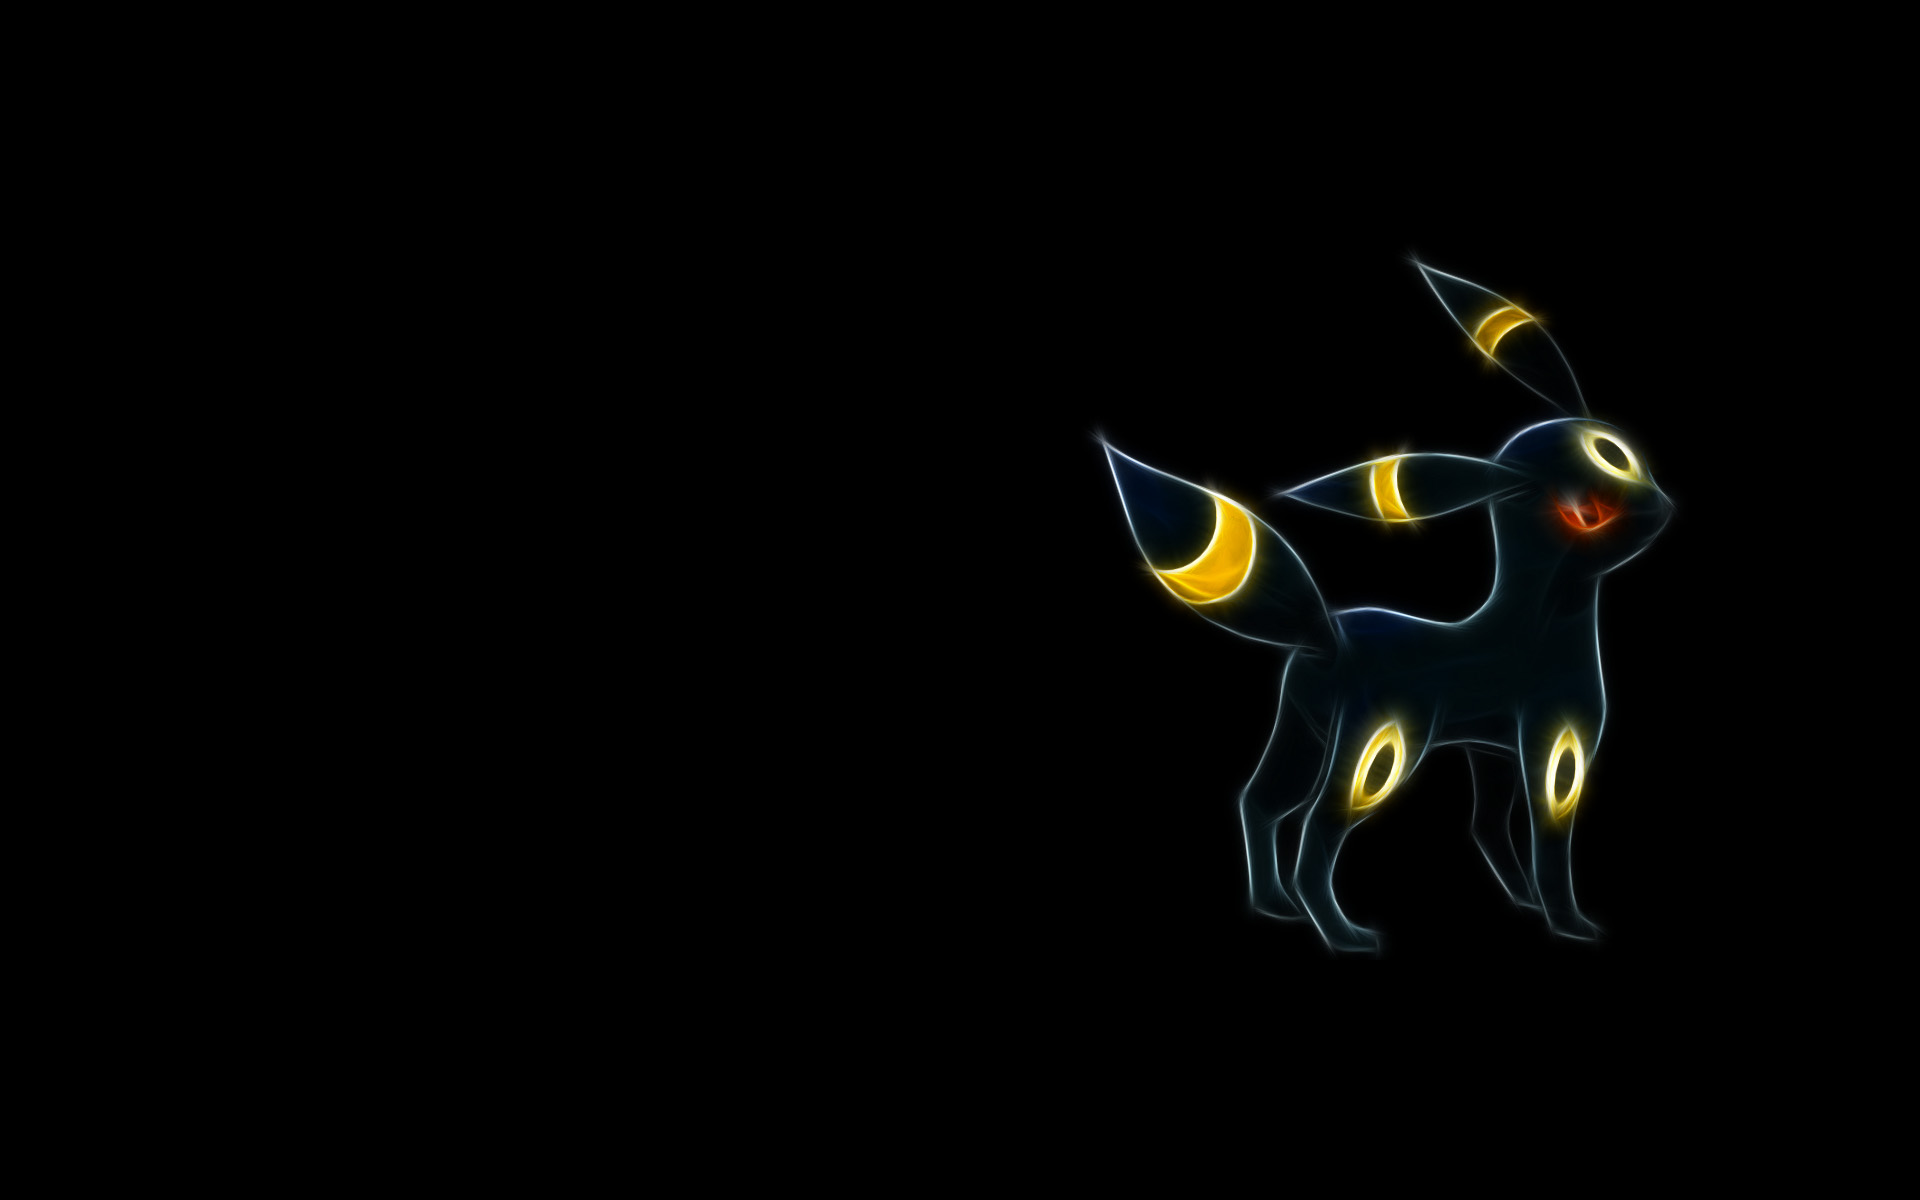 Dark Pokémon HD Wallpapers and Backgrounds. 